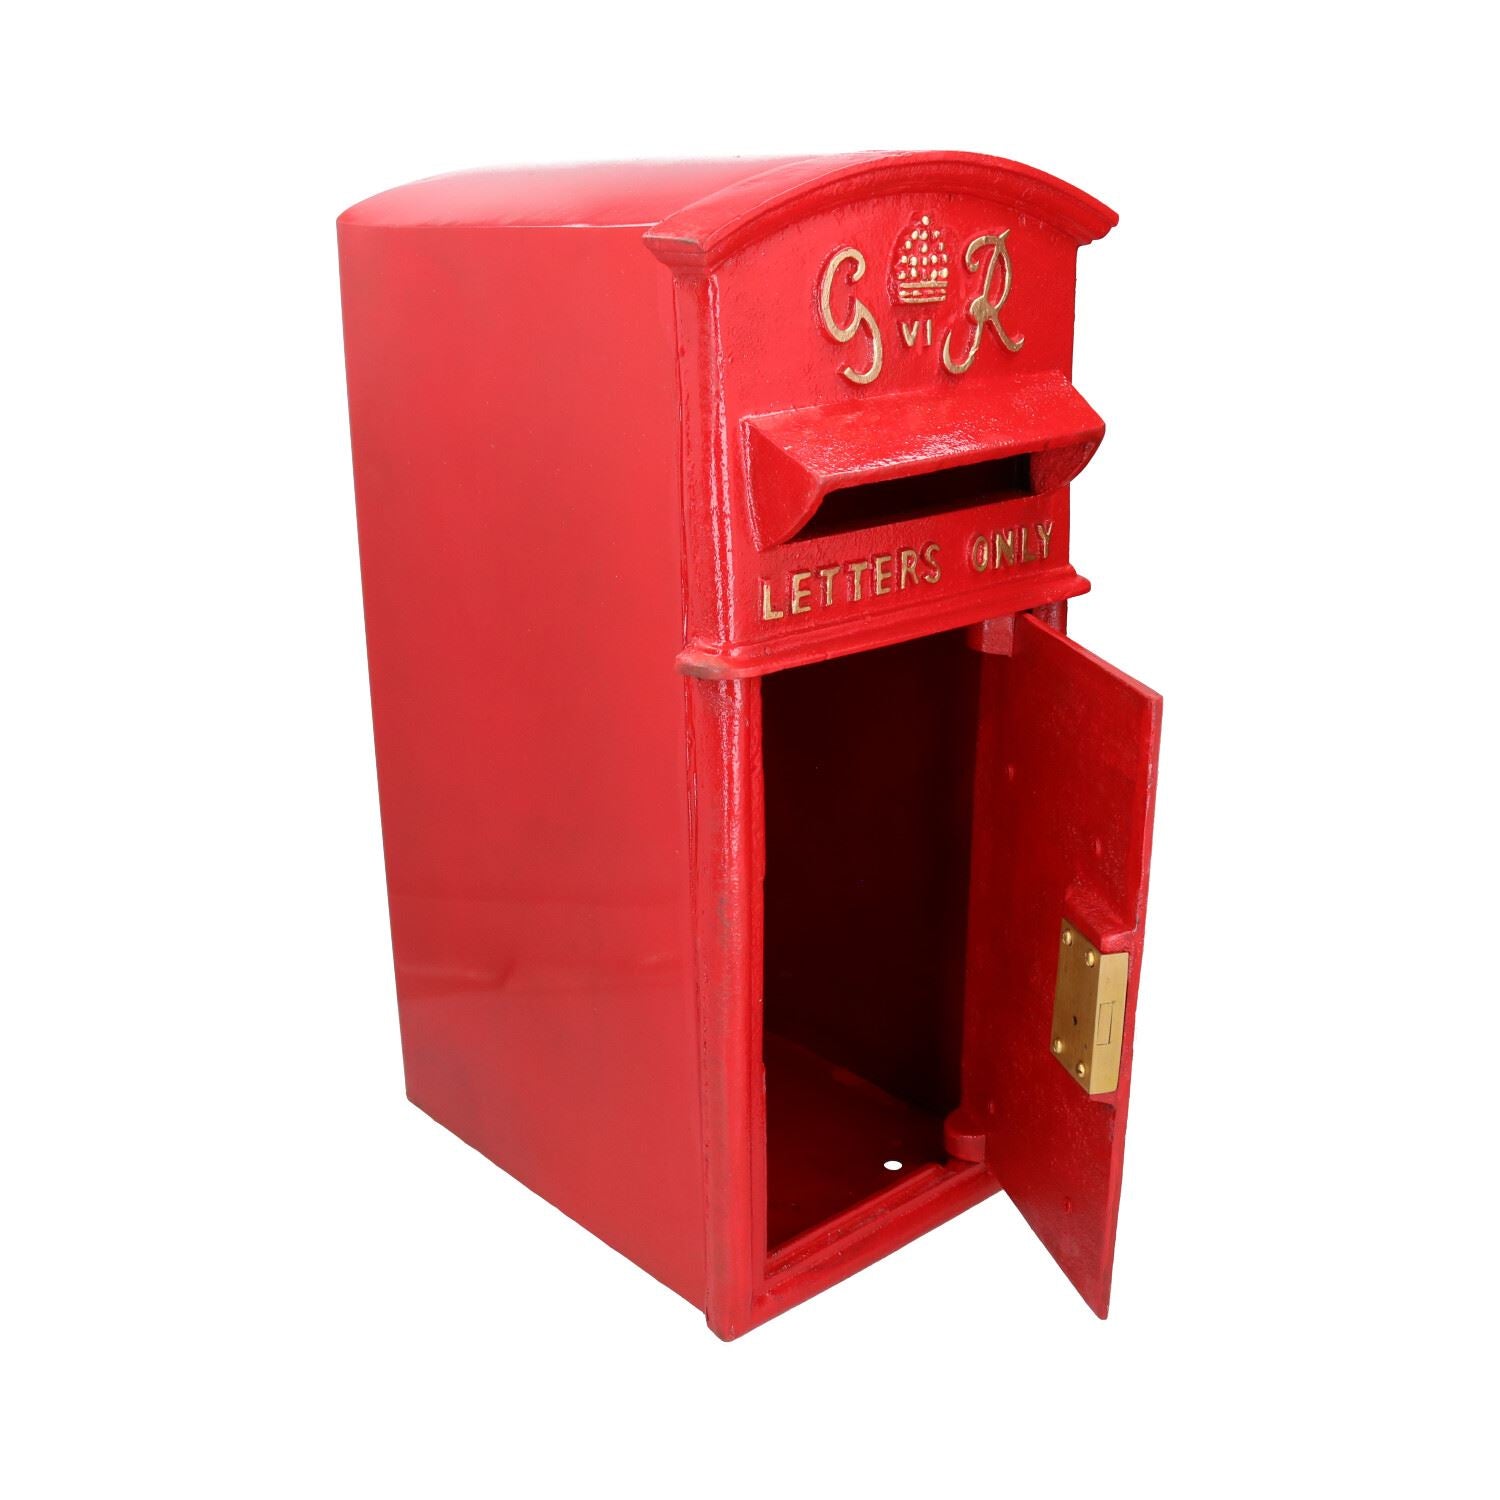 GR Royal Mail Post Mail Letter Box Replica Cast Iron Red Post Office & Wall Mount